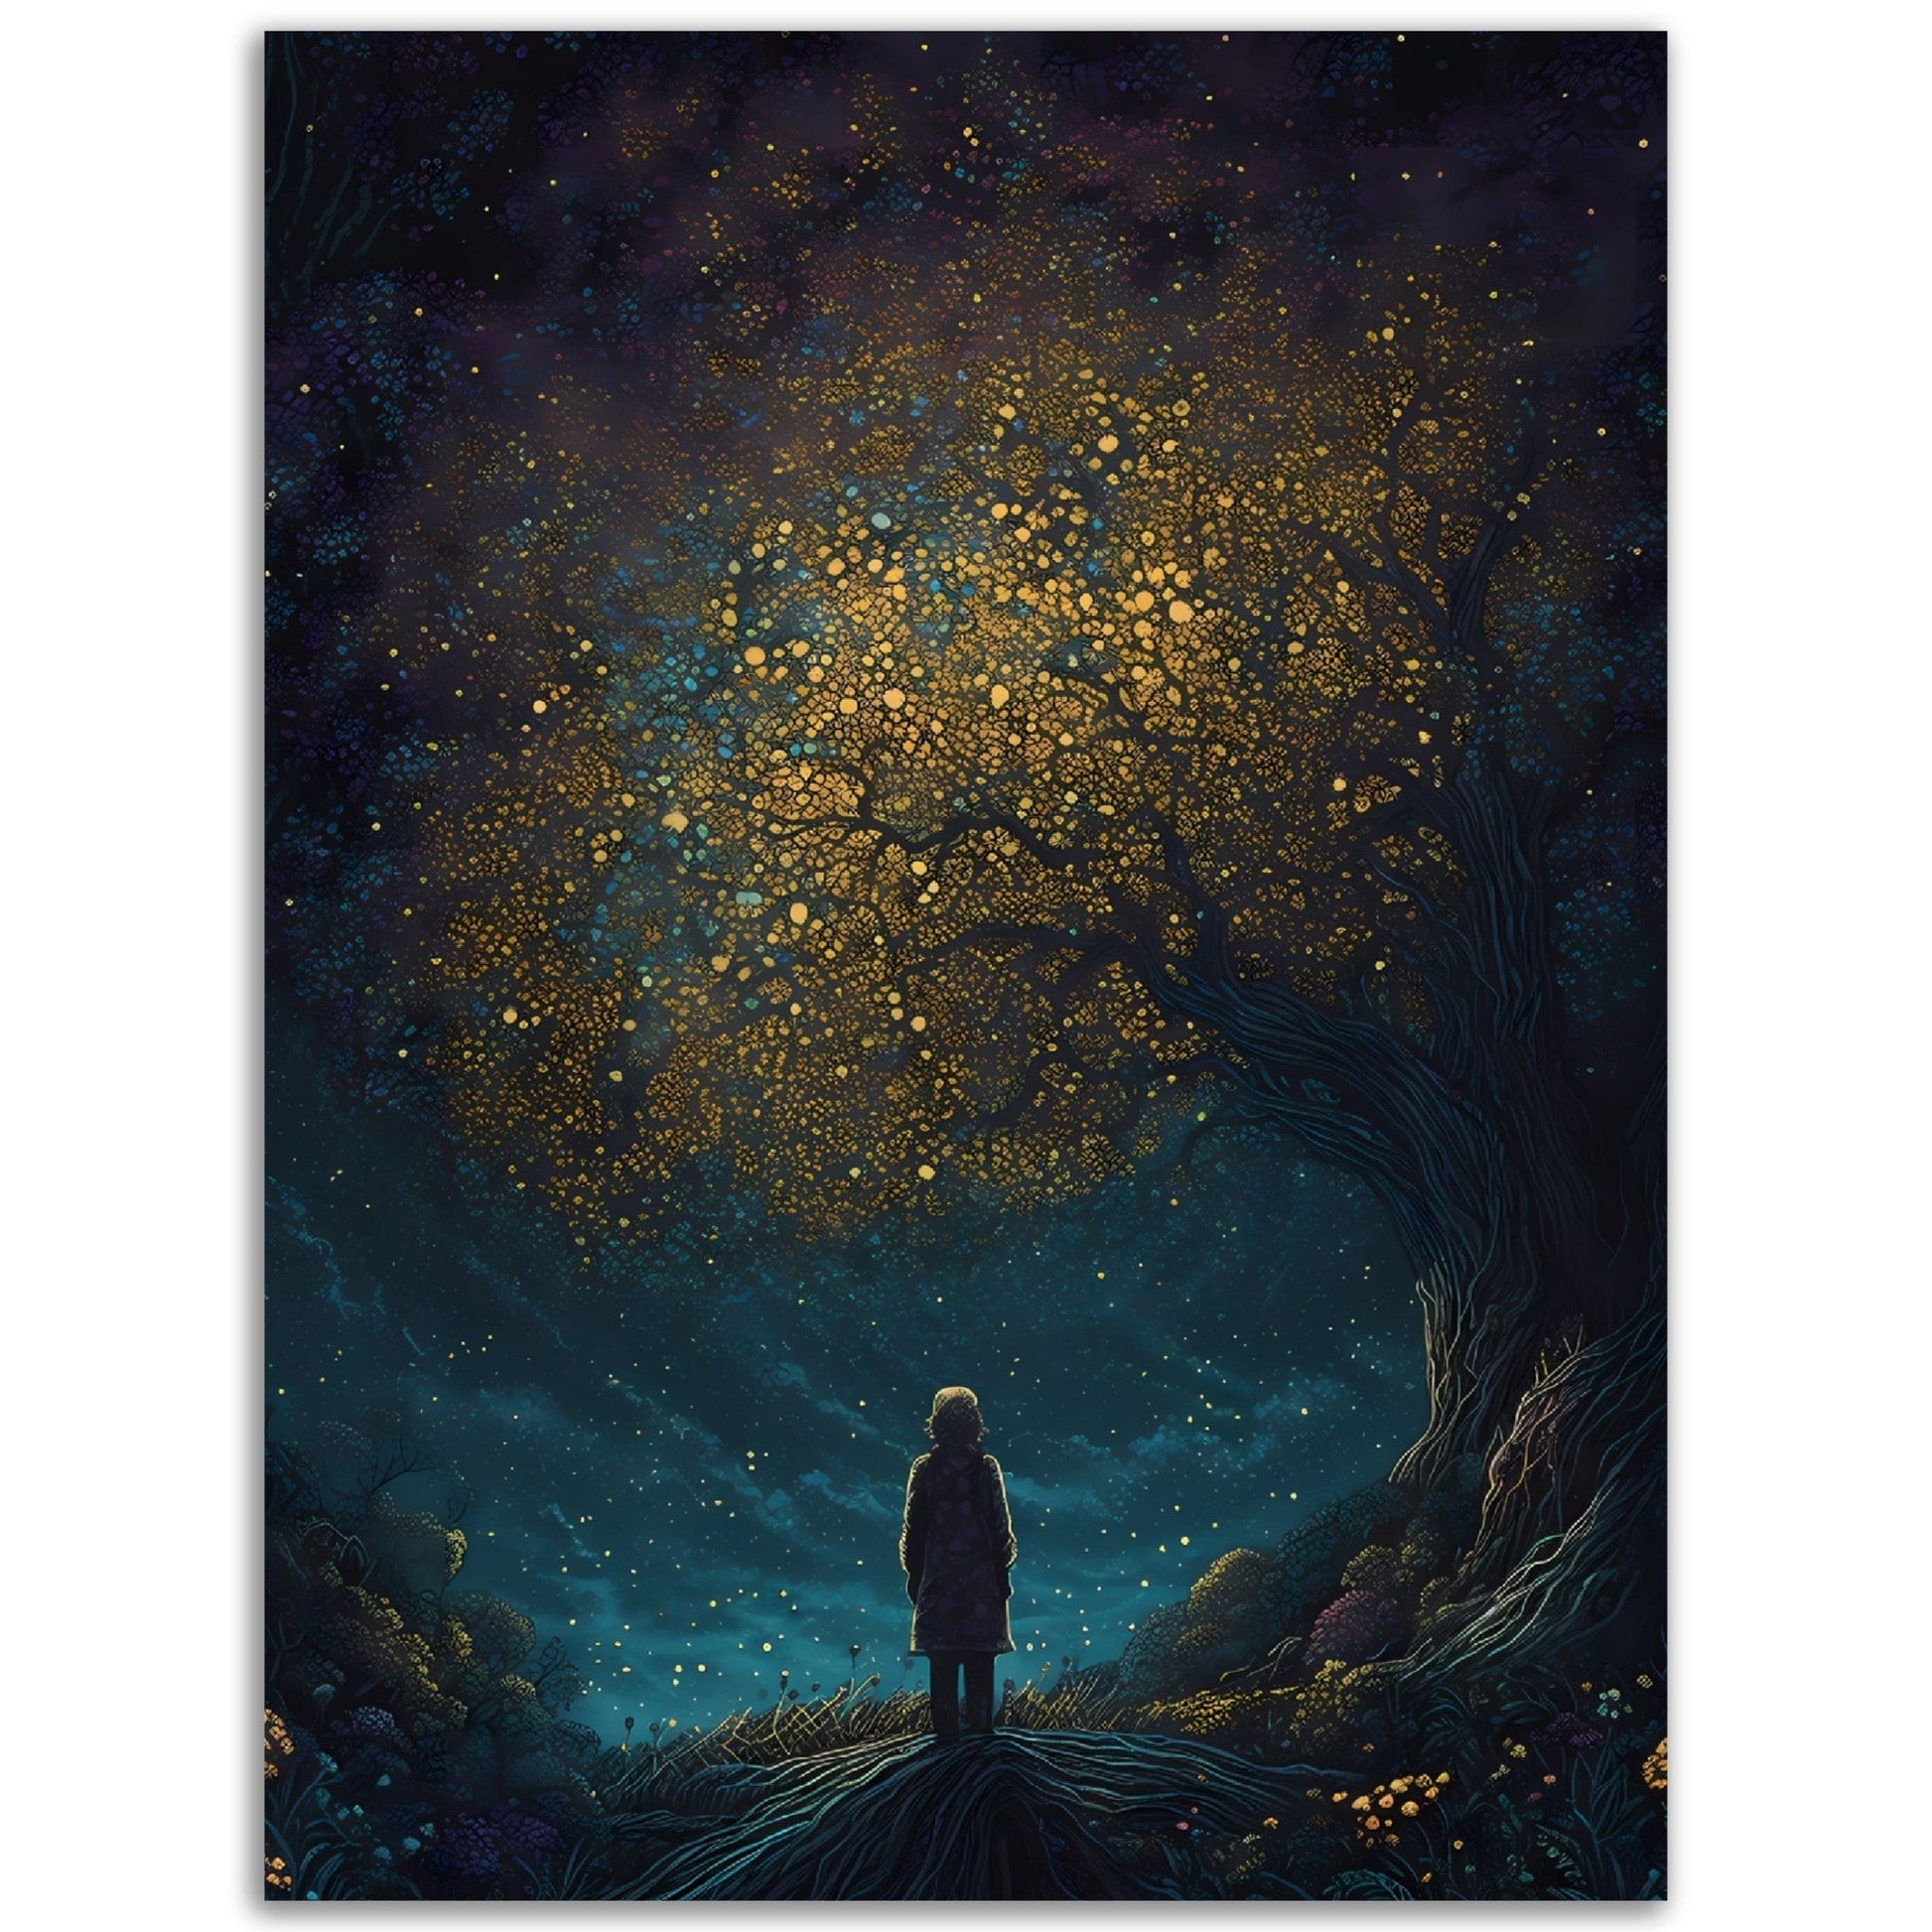 High quality Twilight Pondering by The Golden Tree wall art of a girl standing under a tree with stars in the sky.